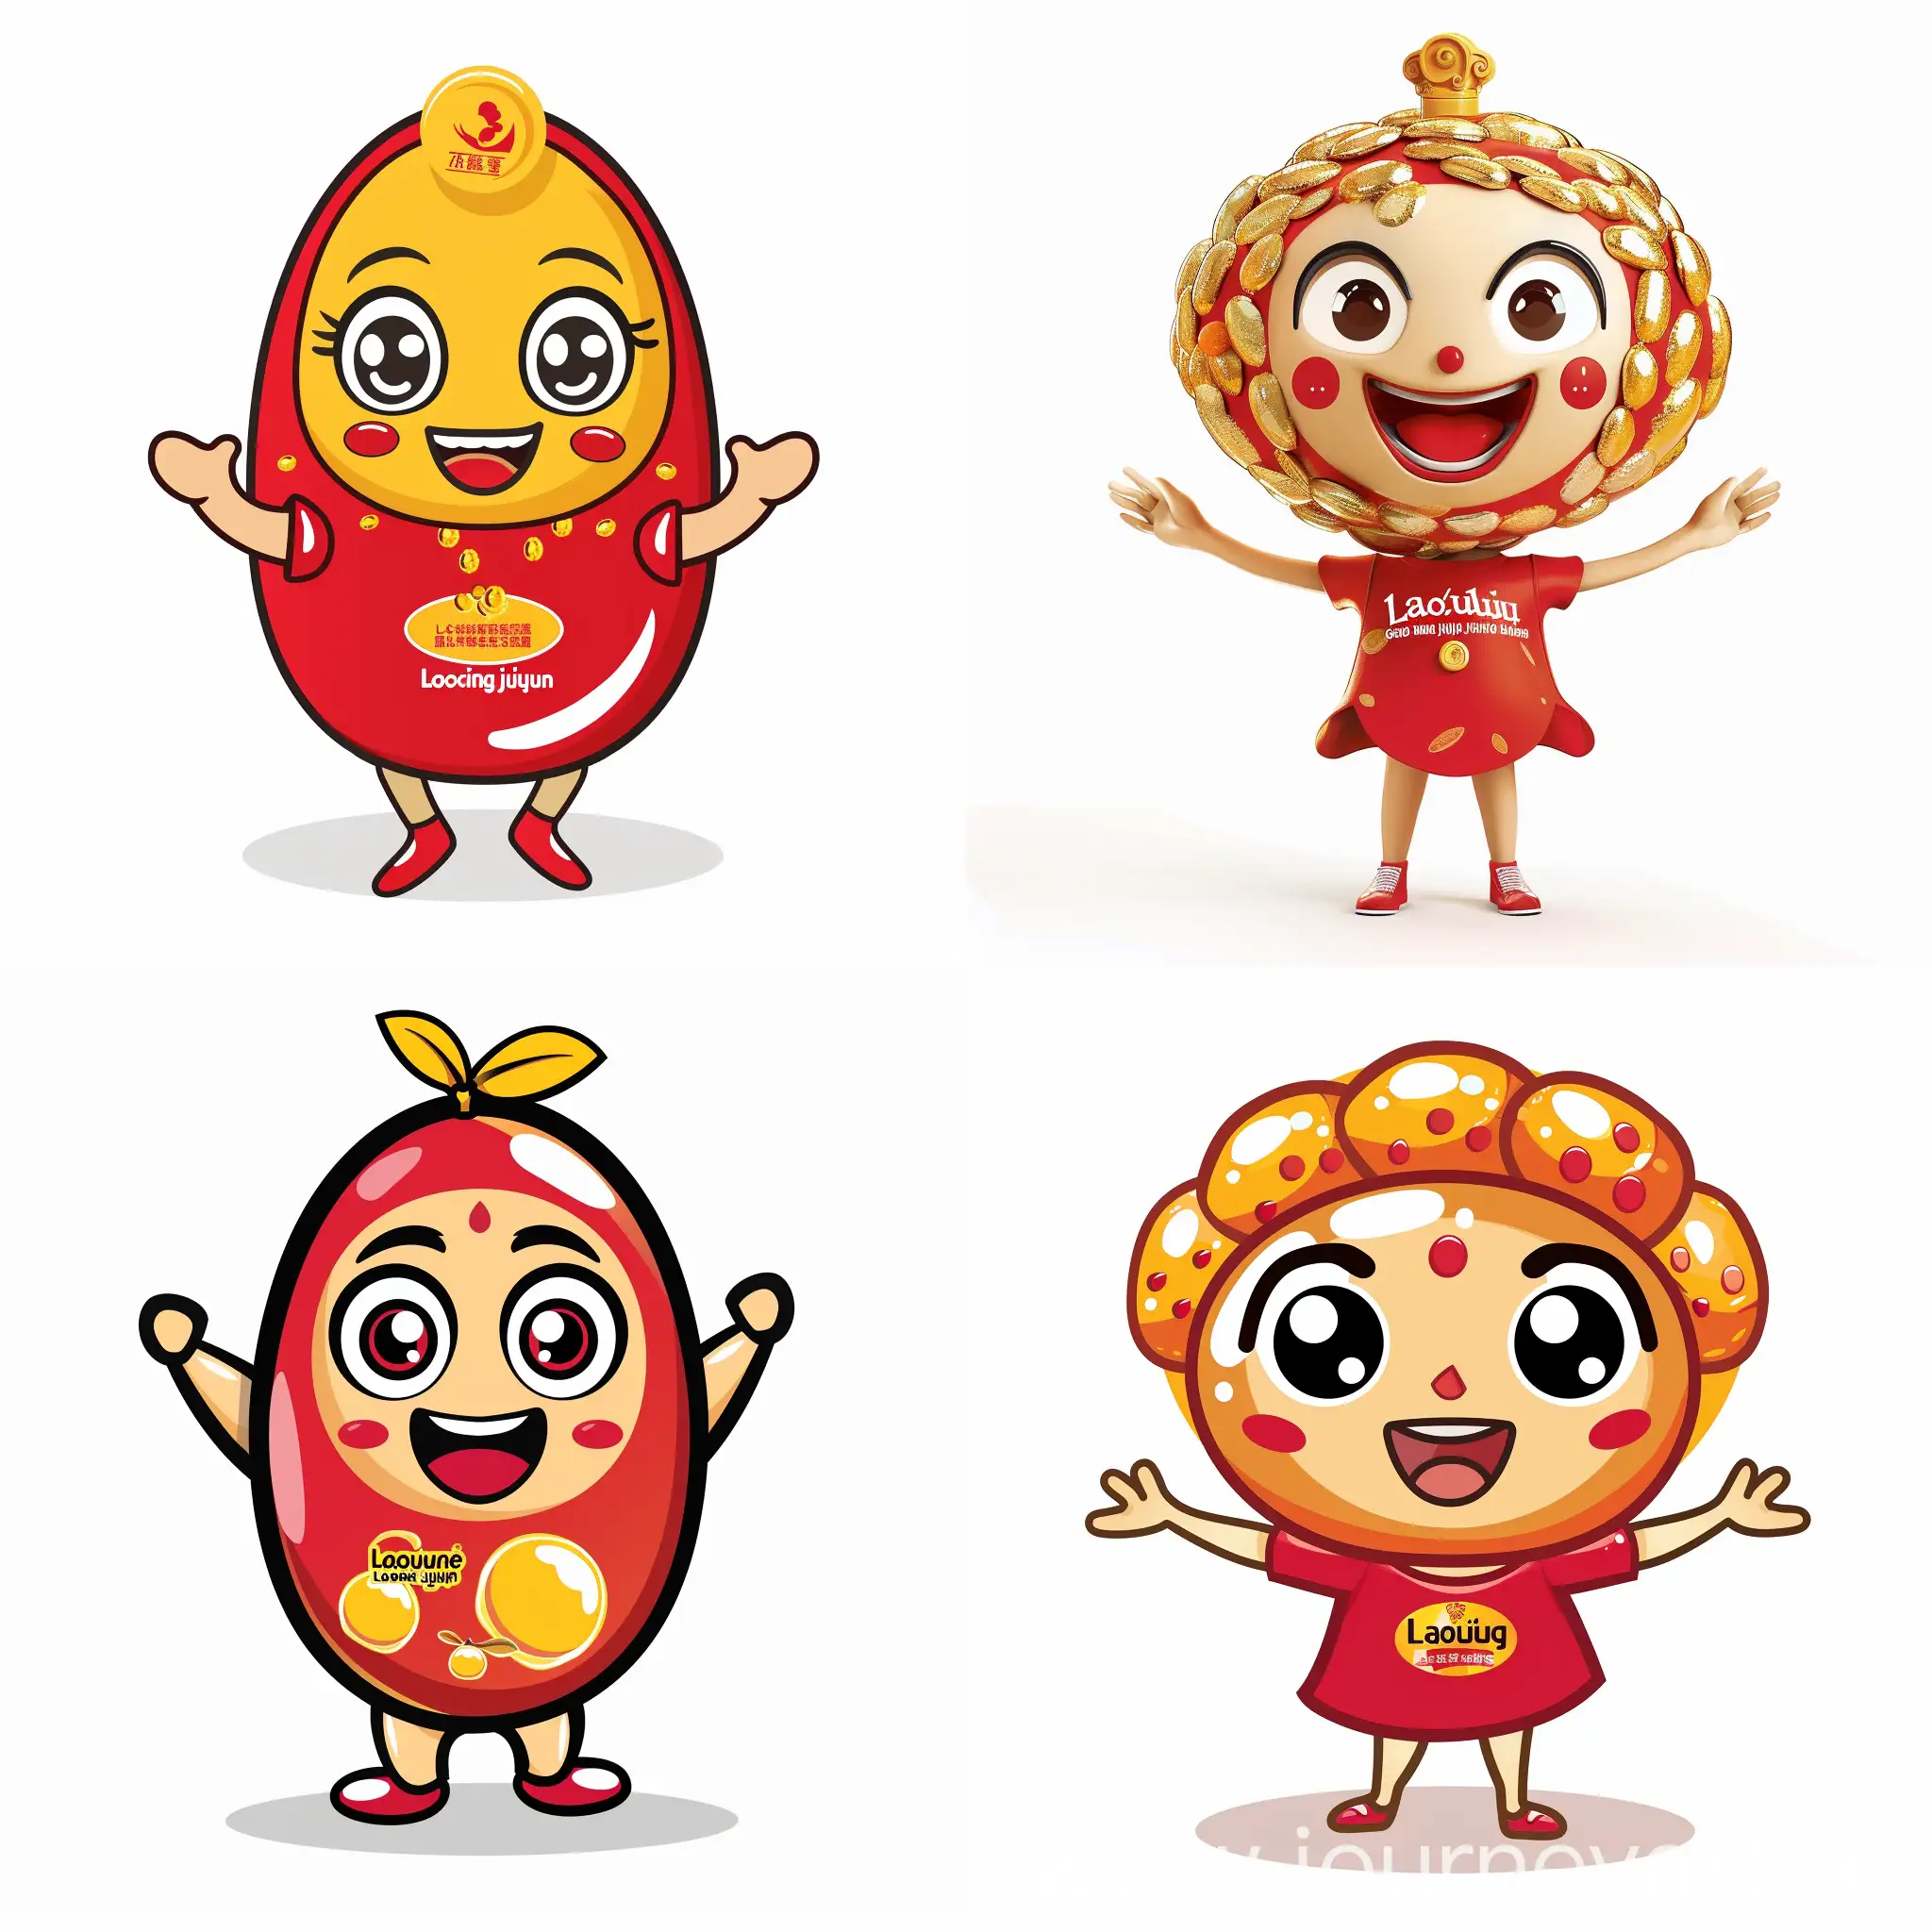 Joyful-Laoling-Golden-Jujube-Mascot-with-Red-TShirt-and-Golden-Crown